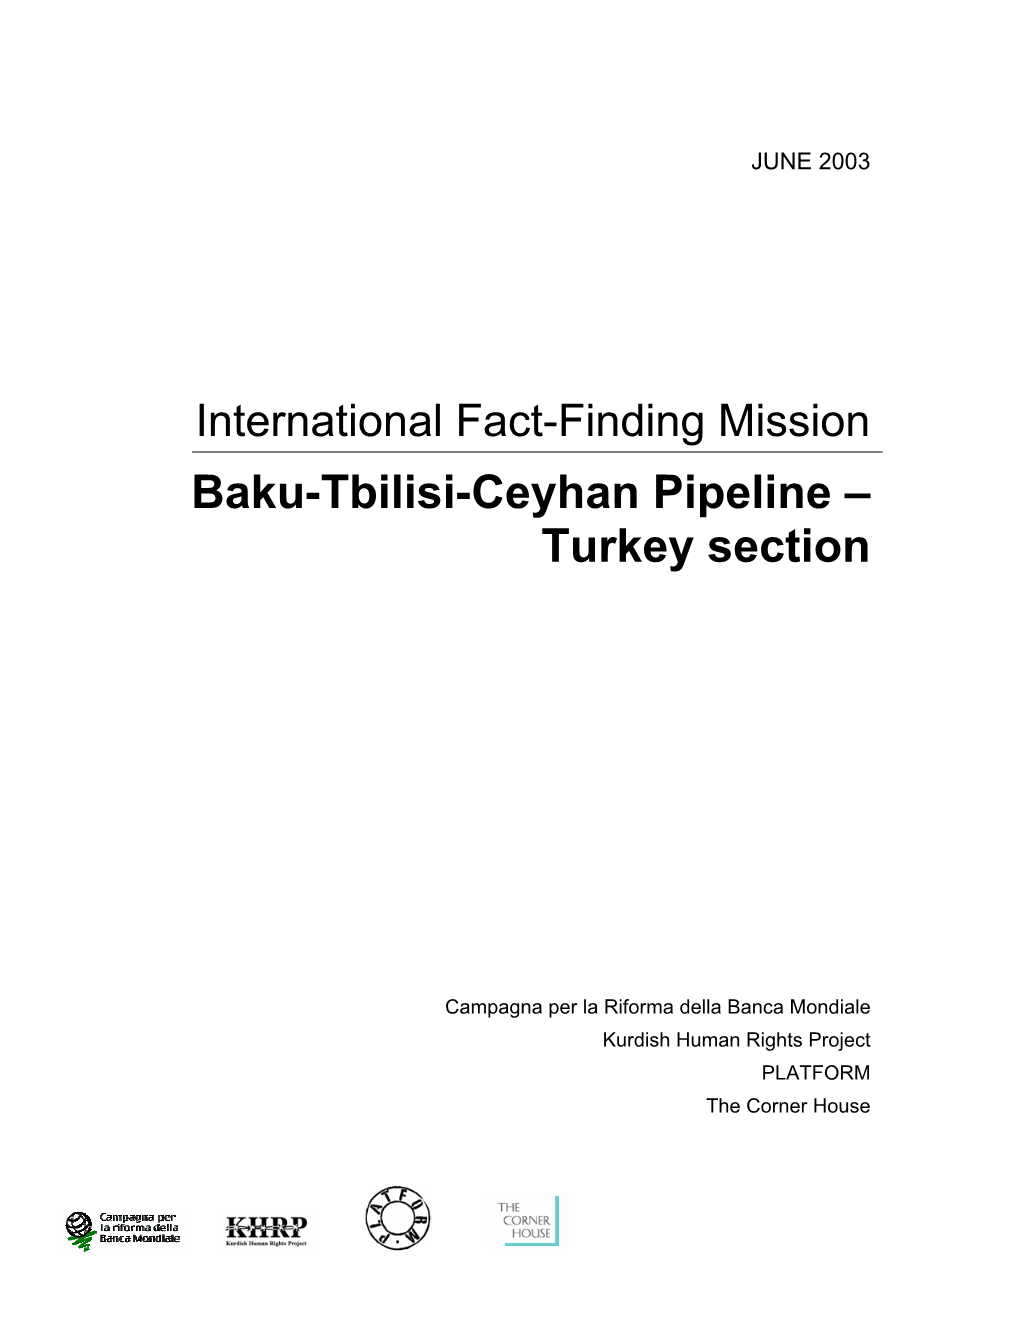 Second International Fact-Finding Mission to Have Visited the Turkish Section of the Pipeline